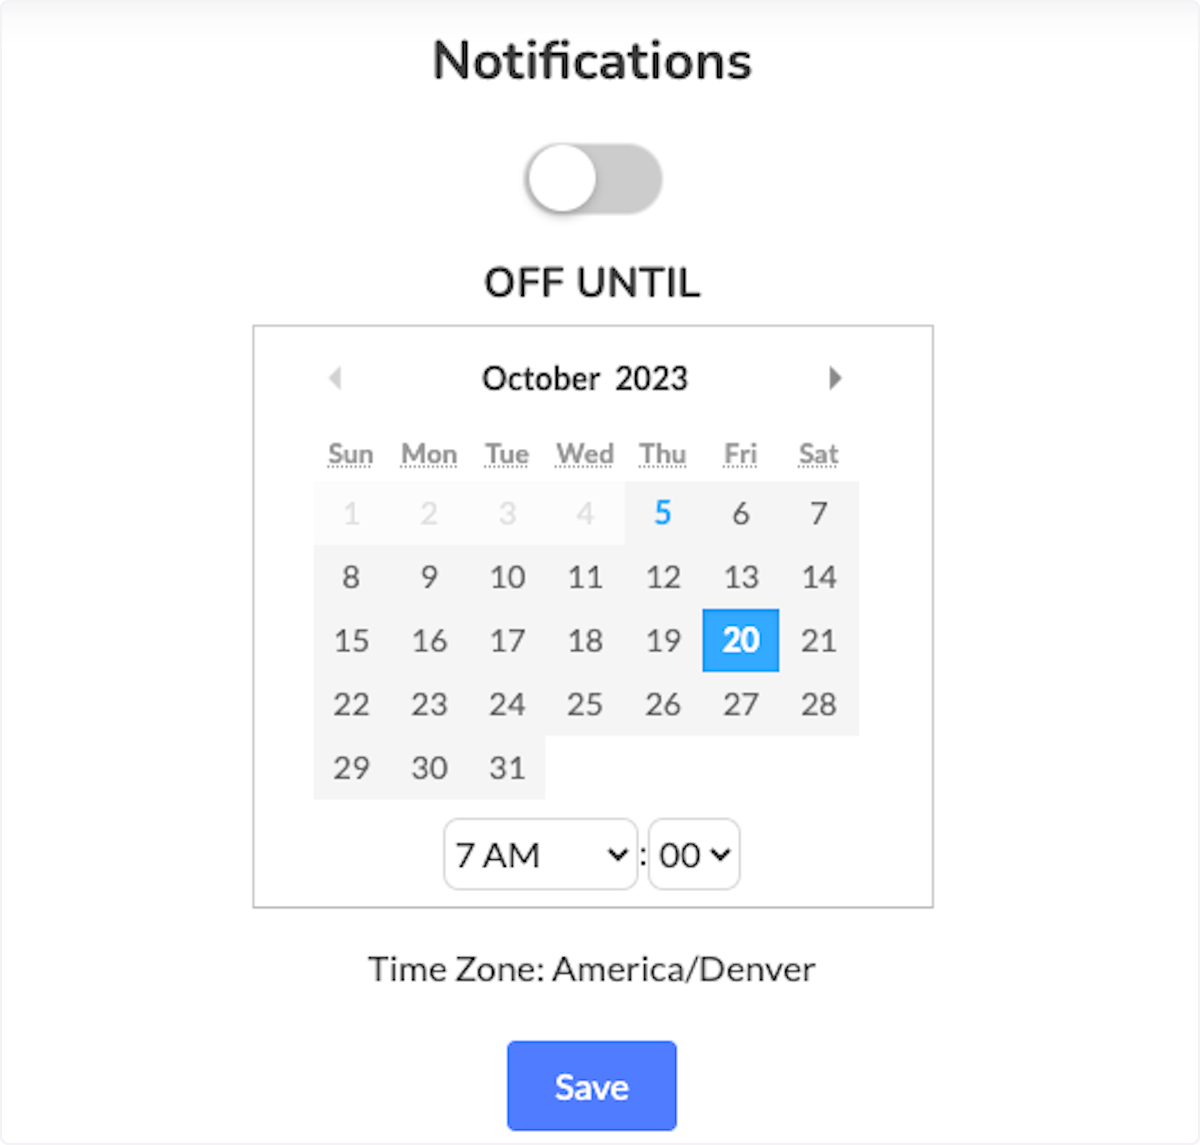 Toggling off Notifications will allow you to disable them for a set period of time. 